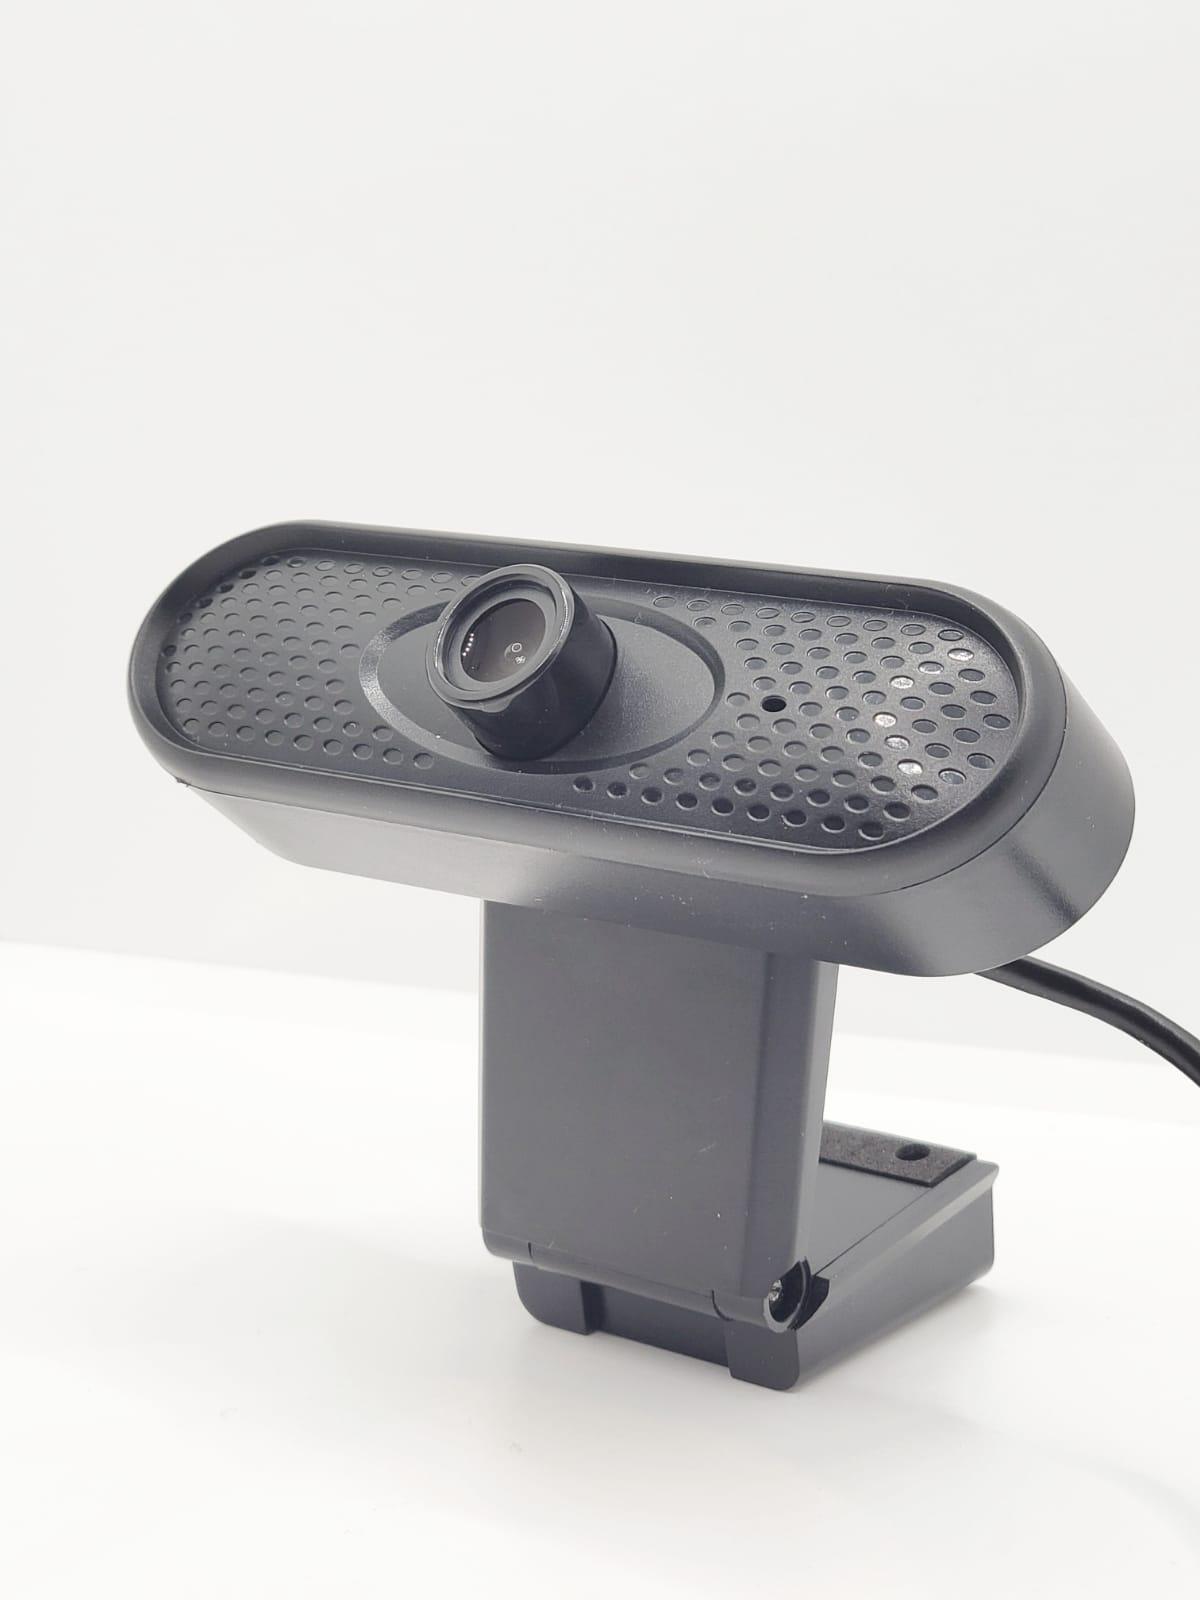 DT 1080P Full HD Webcam with Built-in Microphone for PC/Mac